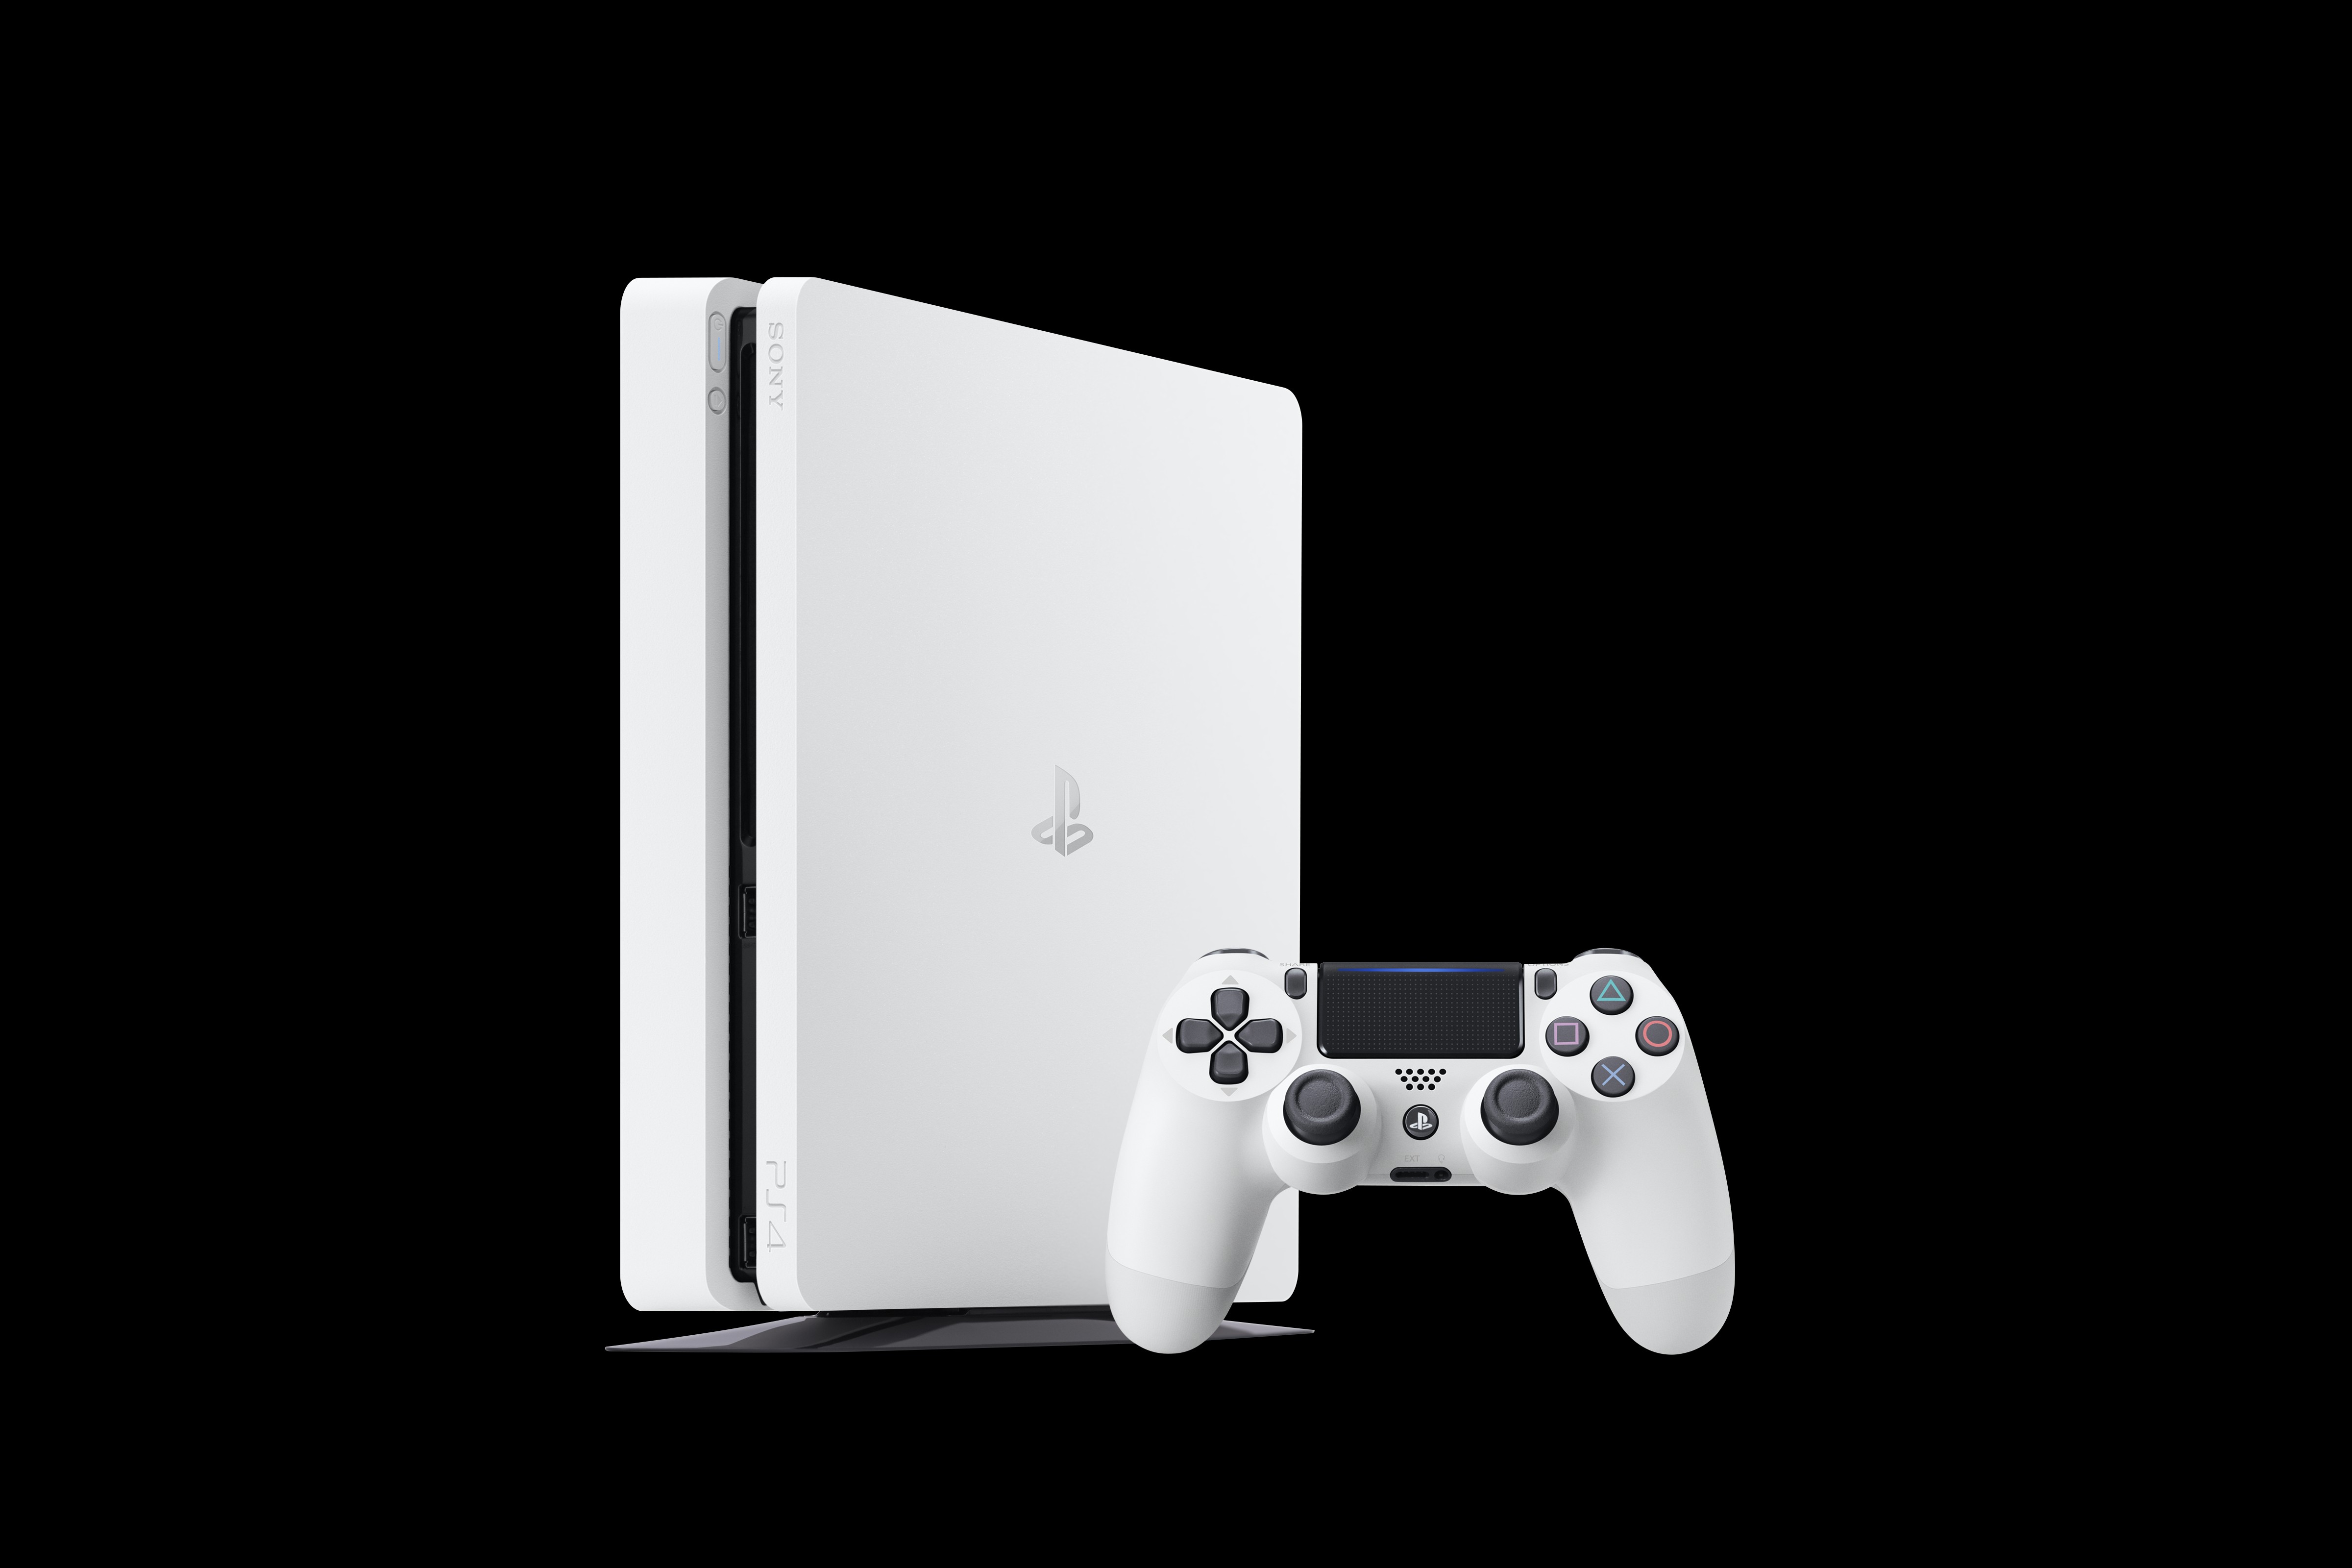 PS4 Slim Launching In Glacier White Color Later This Month